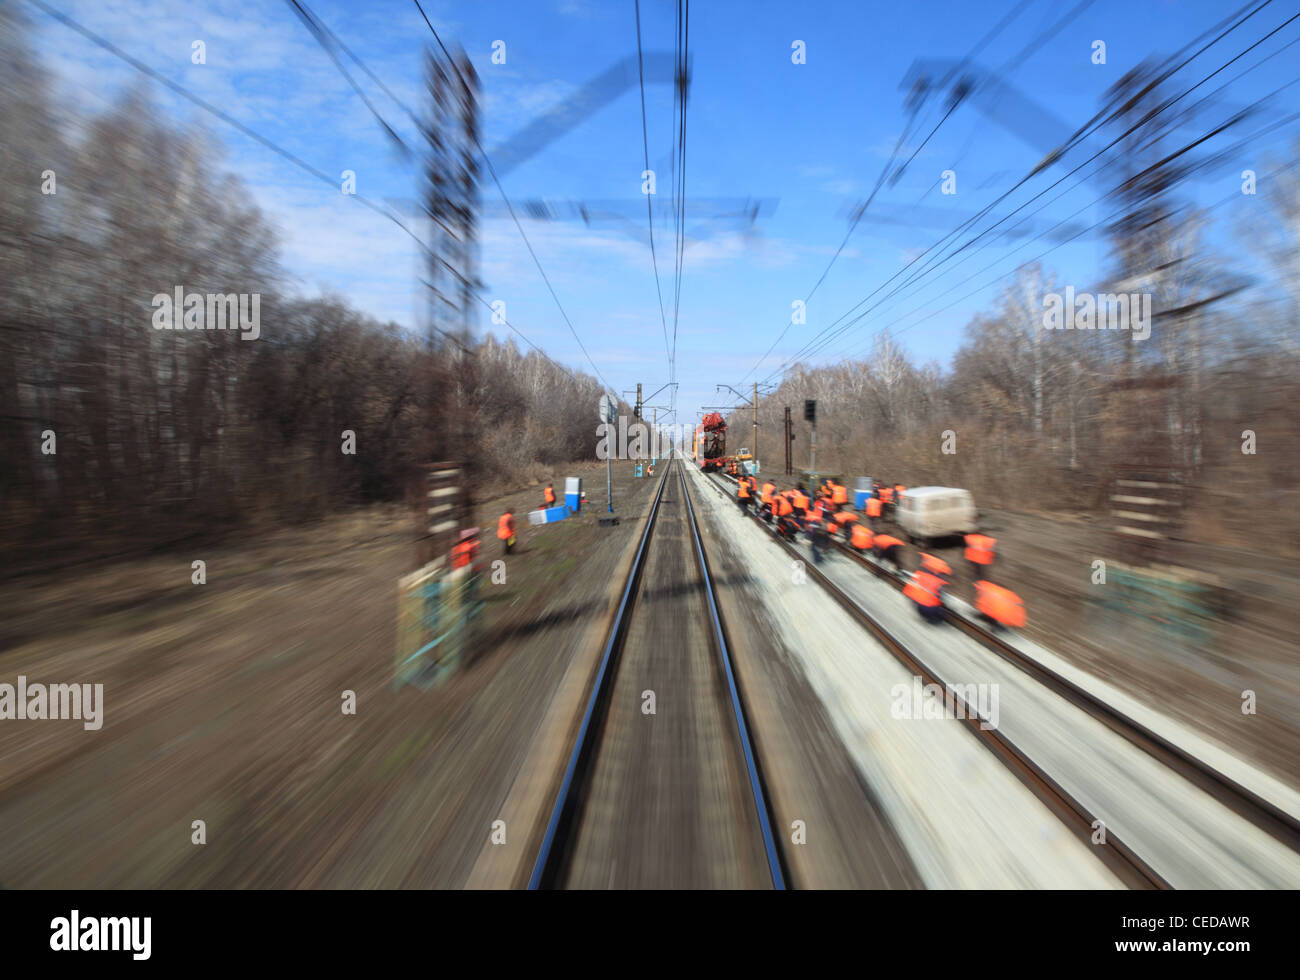 View on railway with maintenance crew from moving train, motion blur Stock Photo